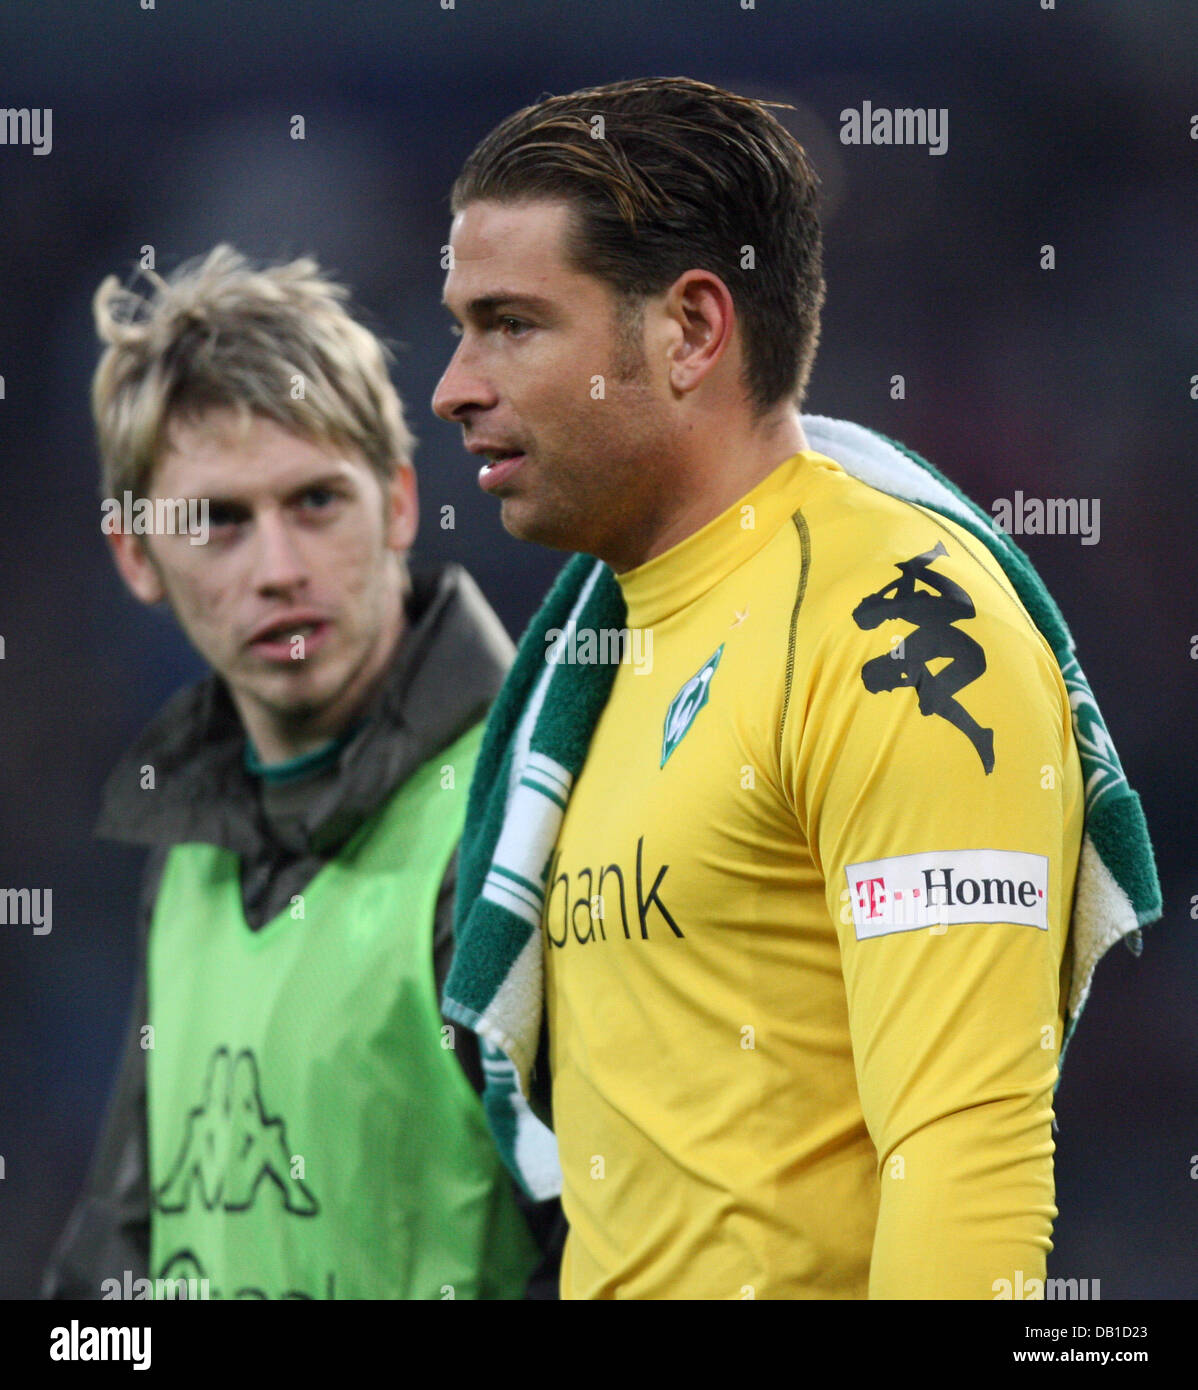 Aaron Hunt (L) and goalkeeper Tim Wiese of Bremen are disappointed after the Bundesliga match Hanover 96 vs Werder Bremen at AWD-Arena stadium in Hanover, Germany, 08 December 2007. Hanover defeated Bremen 4-3. Photo: Friso Gentsch Stock Photo